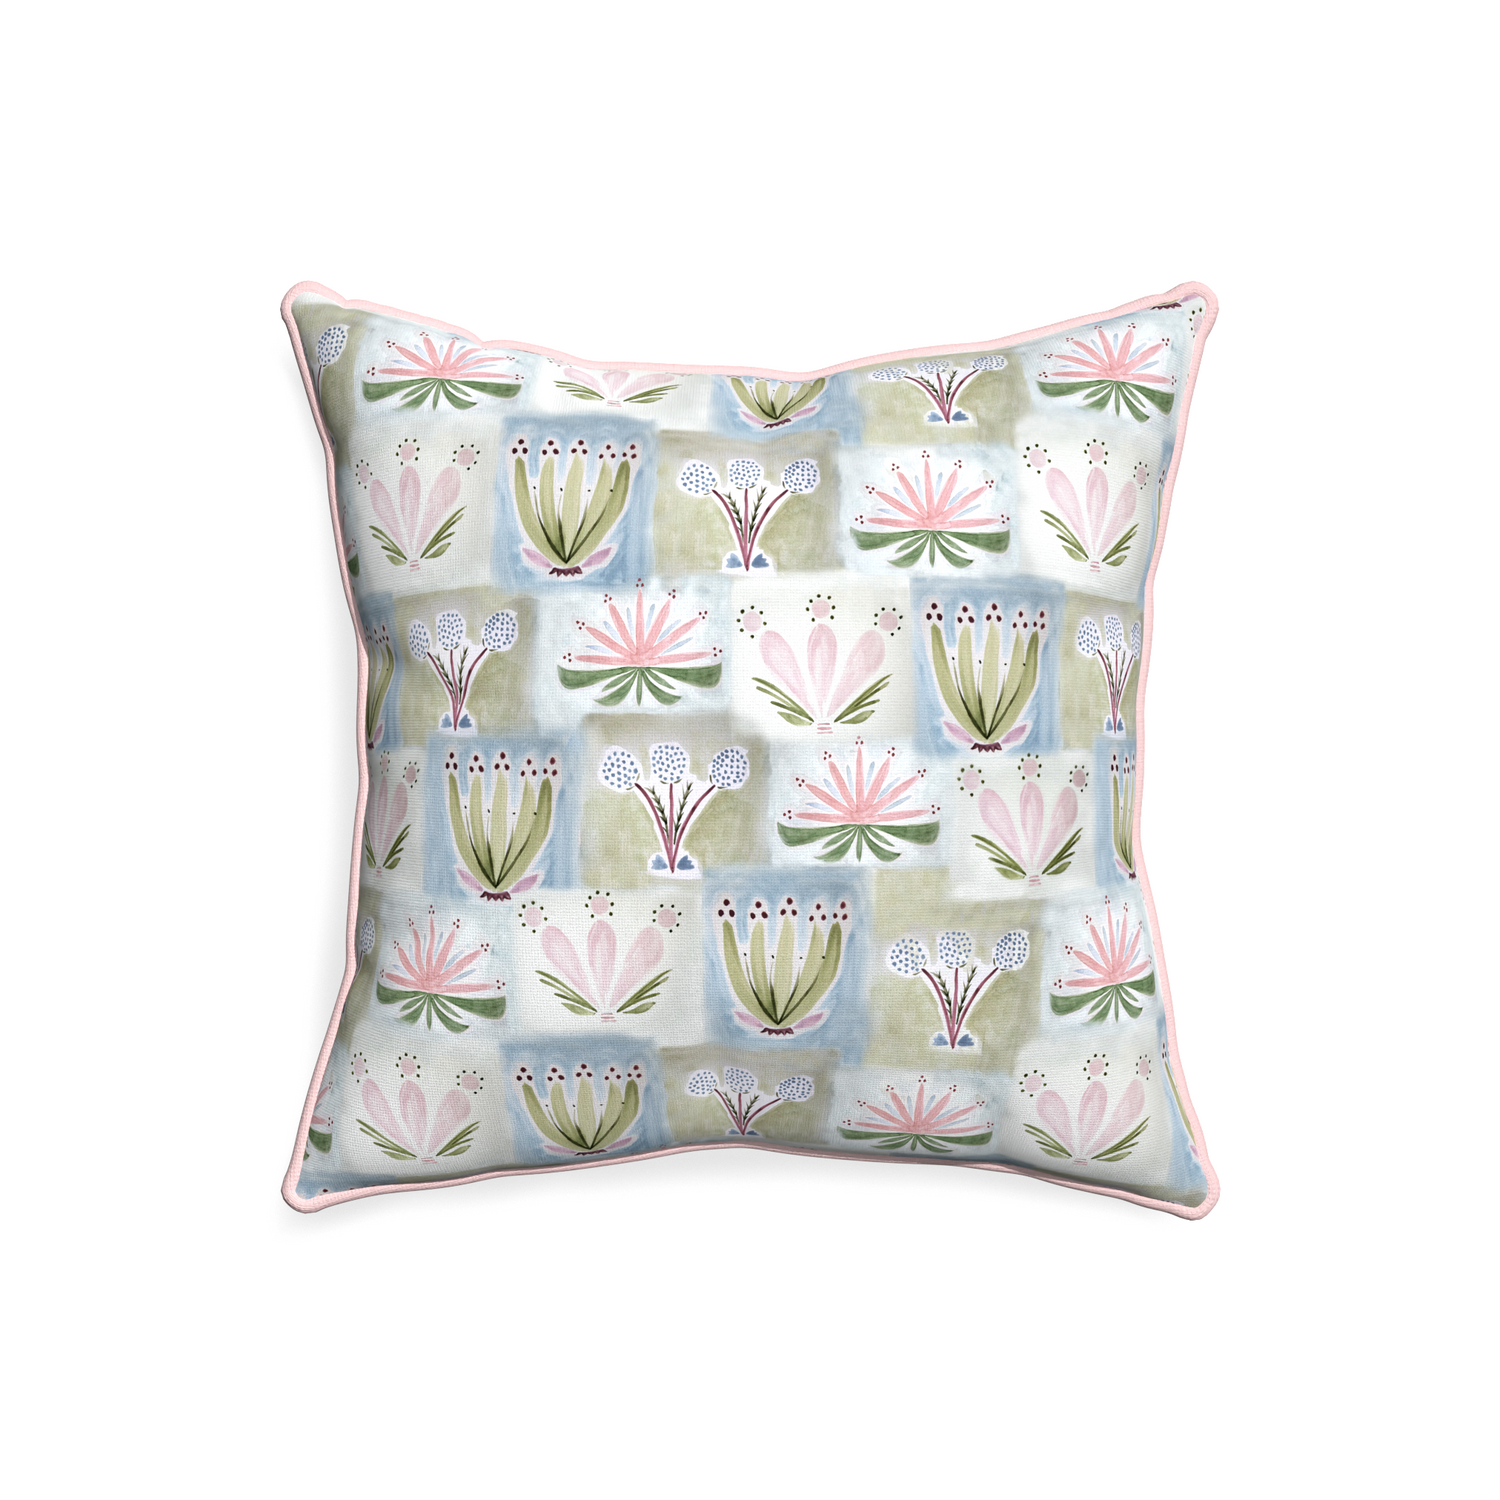 20-square harper custom pillow with petal piping on white background